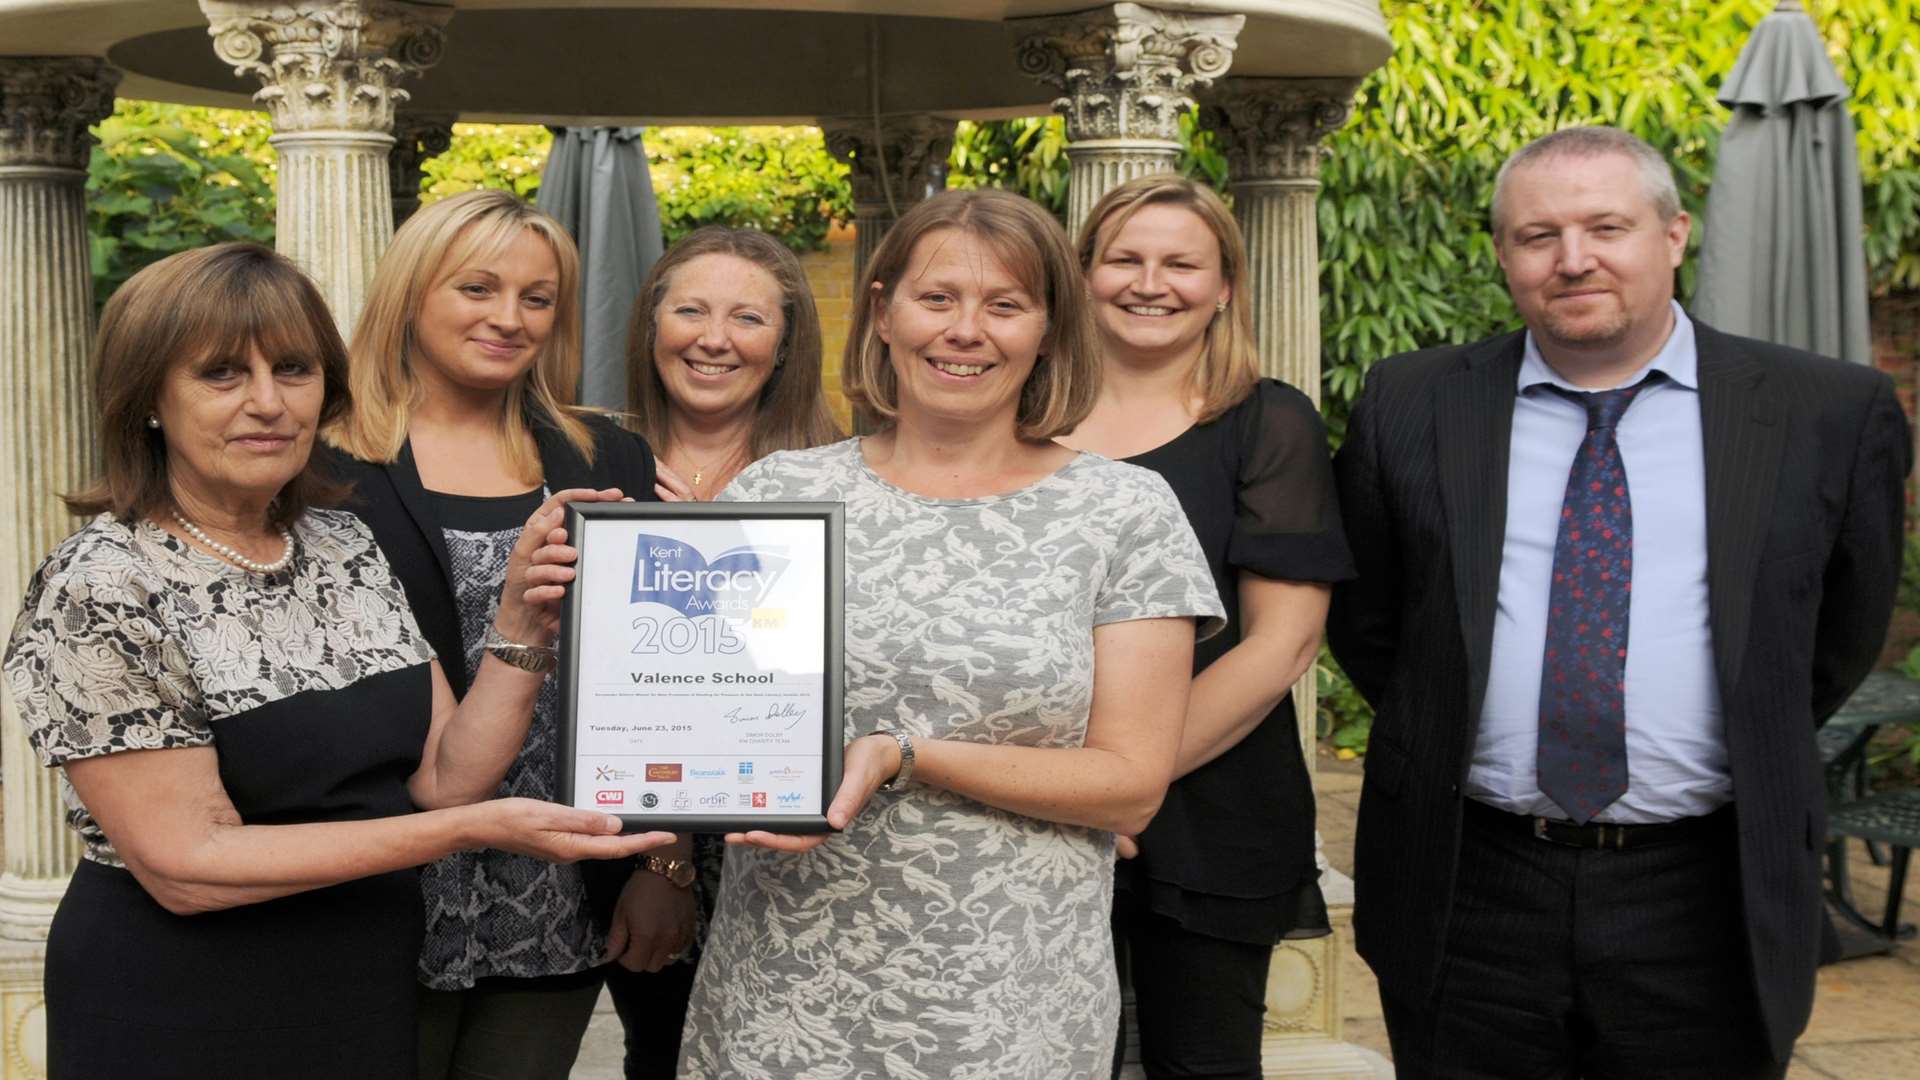 Valence School won the Sevenoaks award for Best Promotion of Reading for Pleasure at the Kent Literacy Awards 2015.